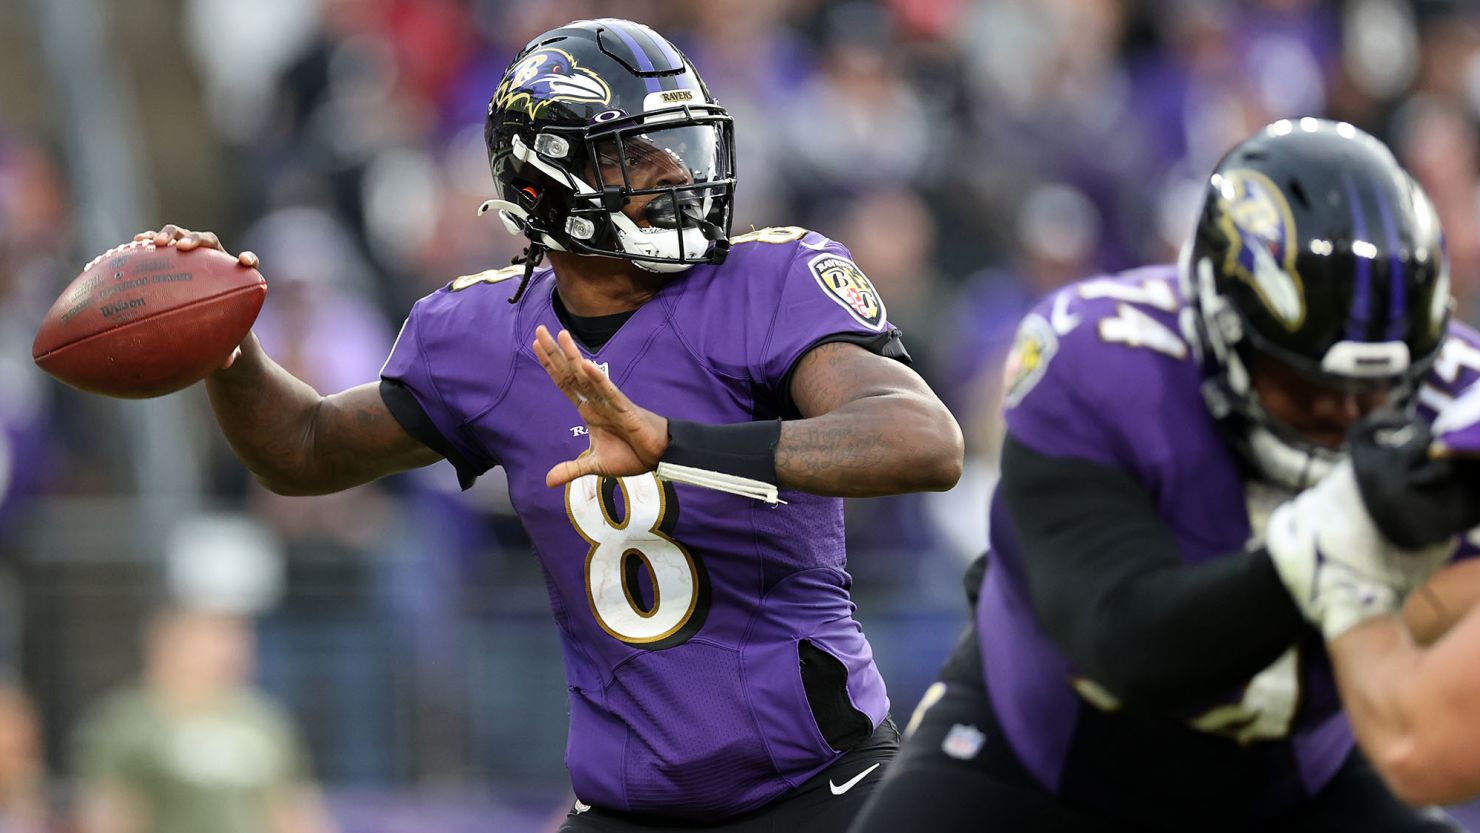 NFL News: Baltimore Ravens’ Zay Flowers Has Been Cleared By The NFL Following an Assault Claim